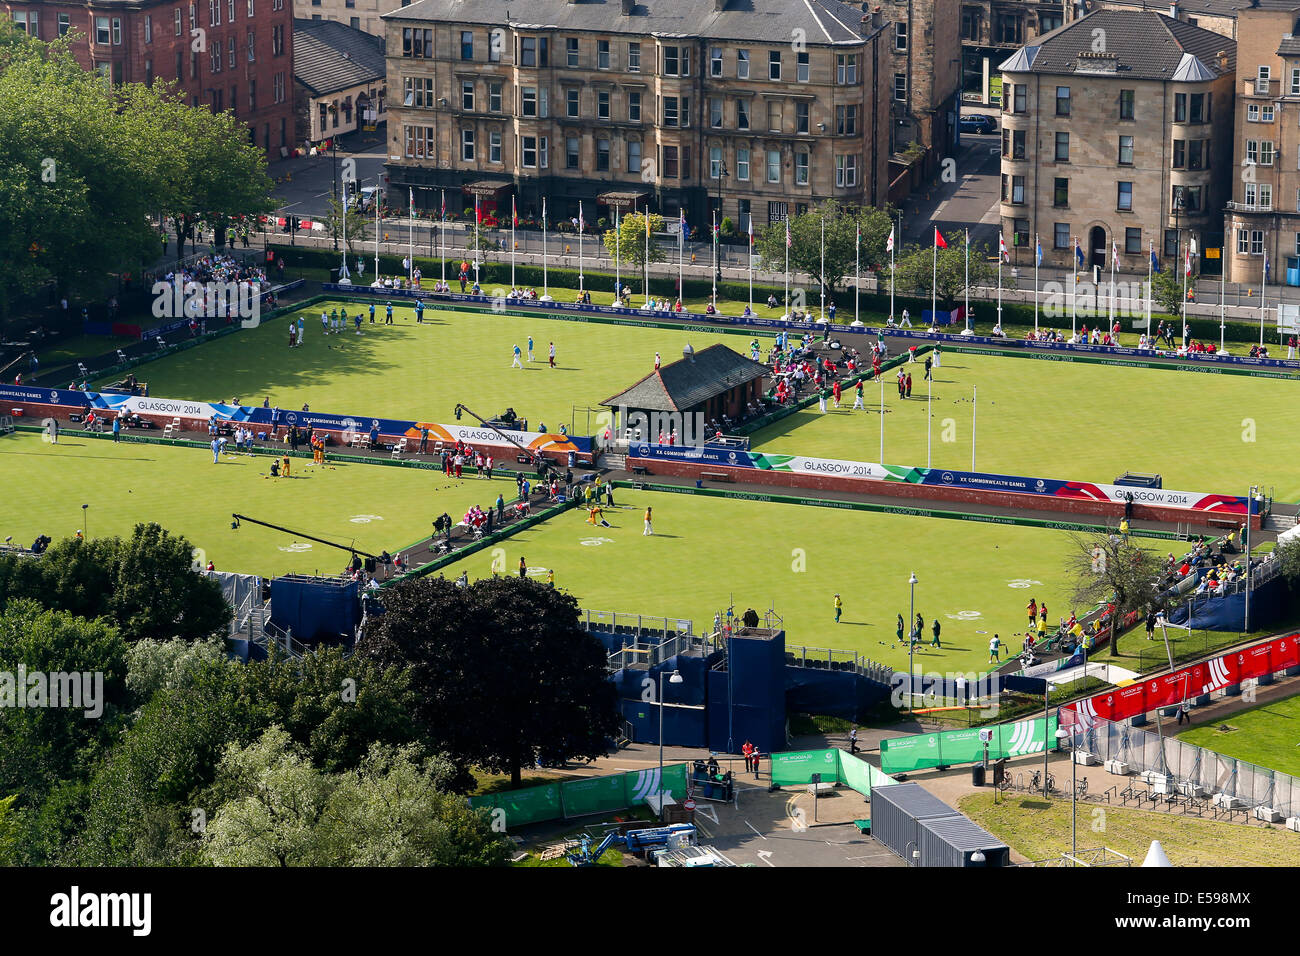 Kelvingrove, Glasgow, Scotland, UK. 24th July, 2014.  Lawn Bowls at Kelvingrove get underway on day one of the games Credit:  ALAN OLIVER/Alamy Live News Stock Photo